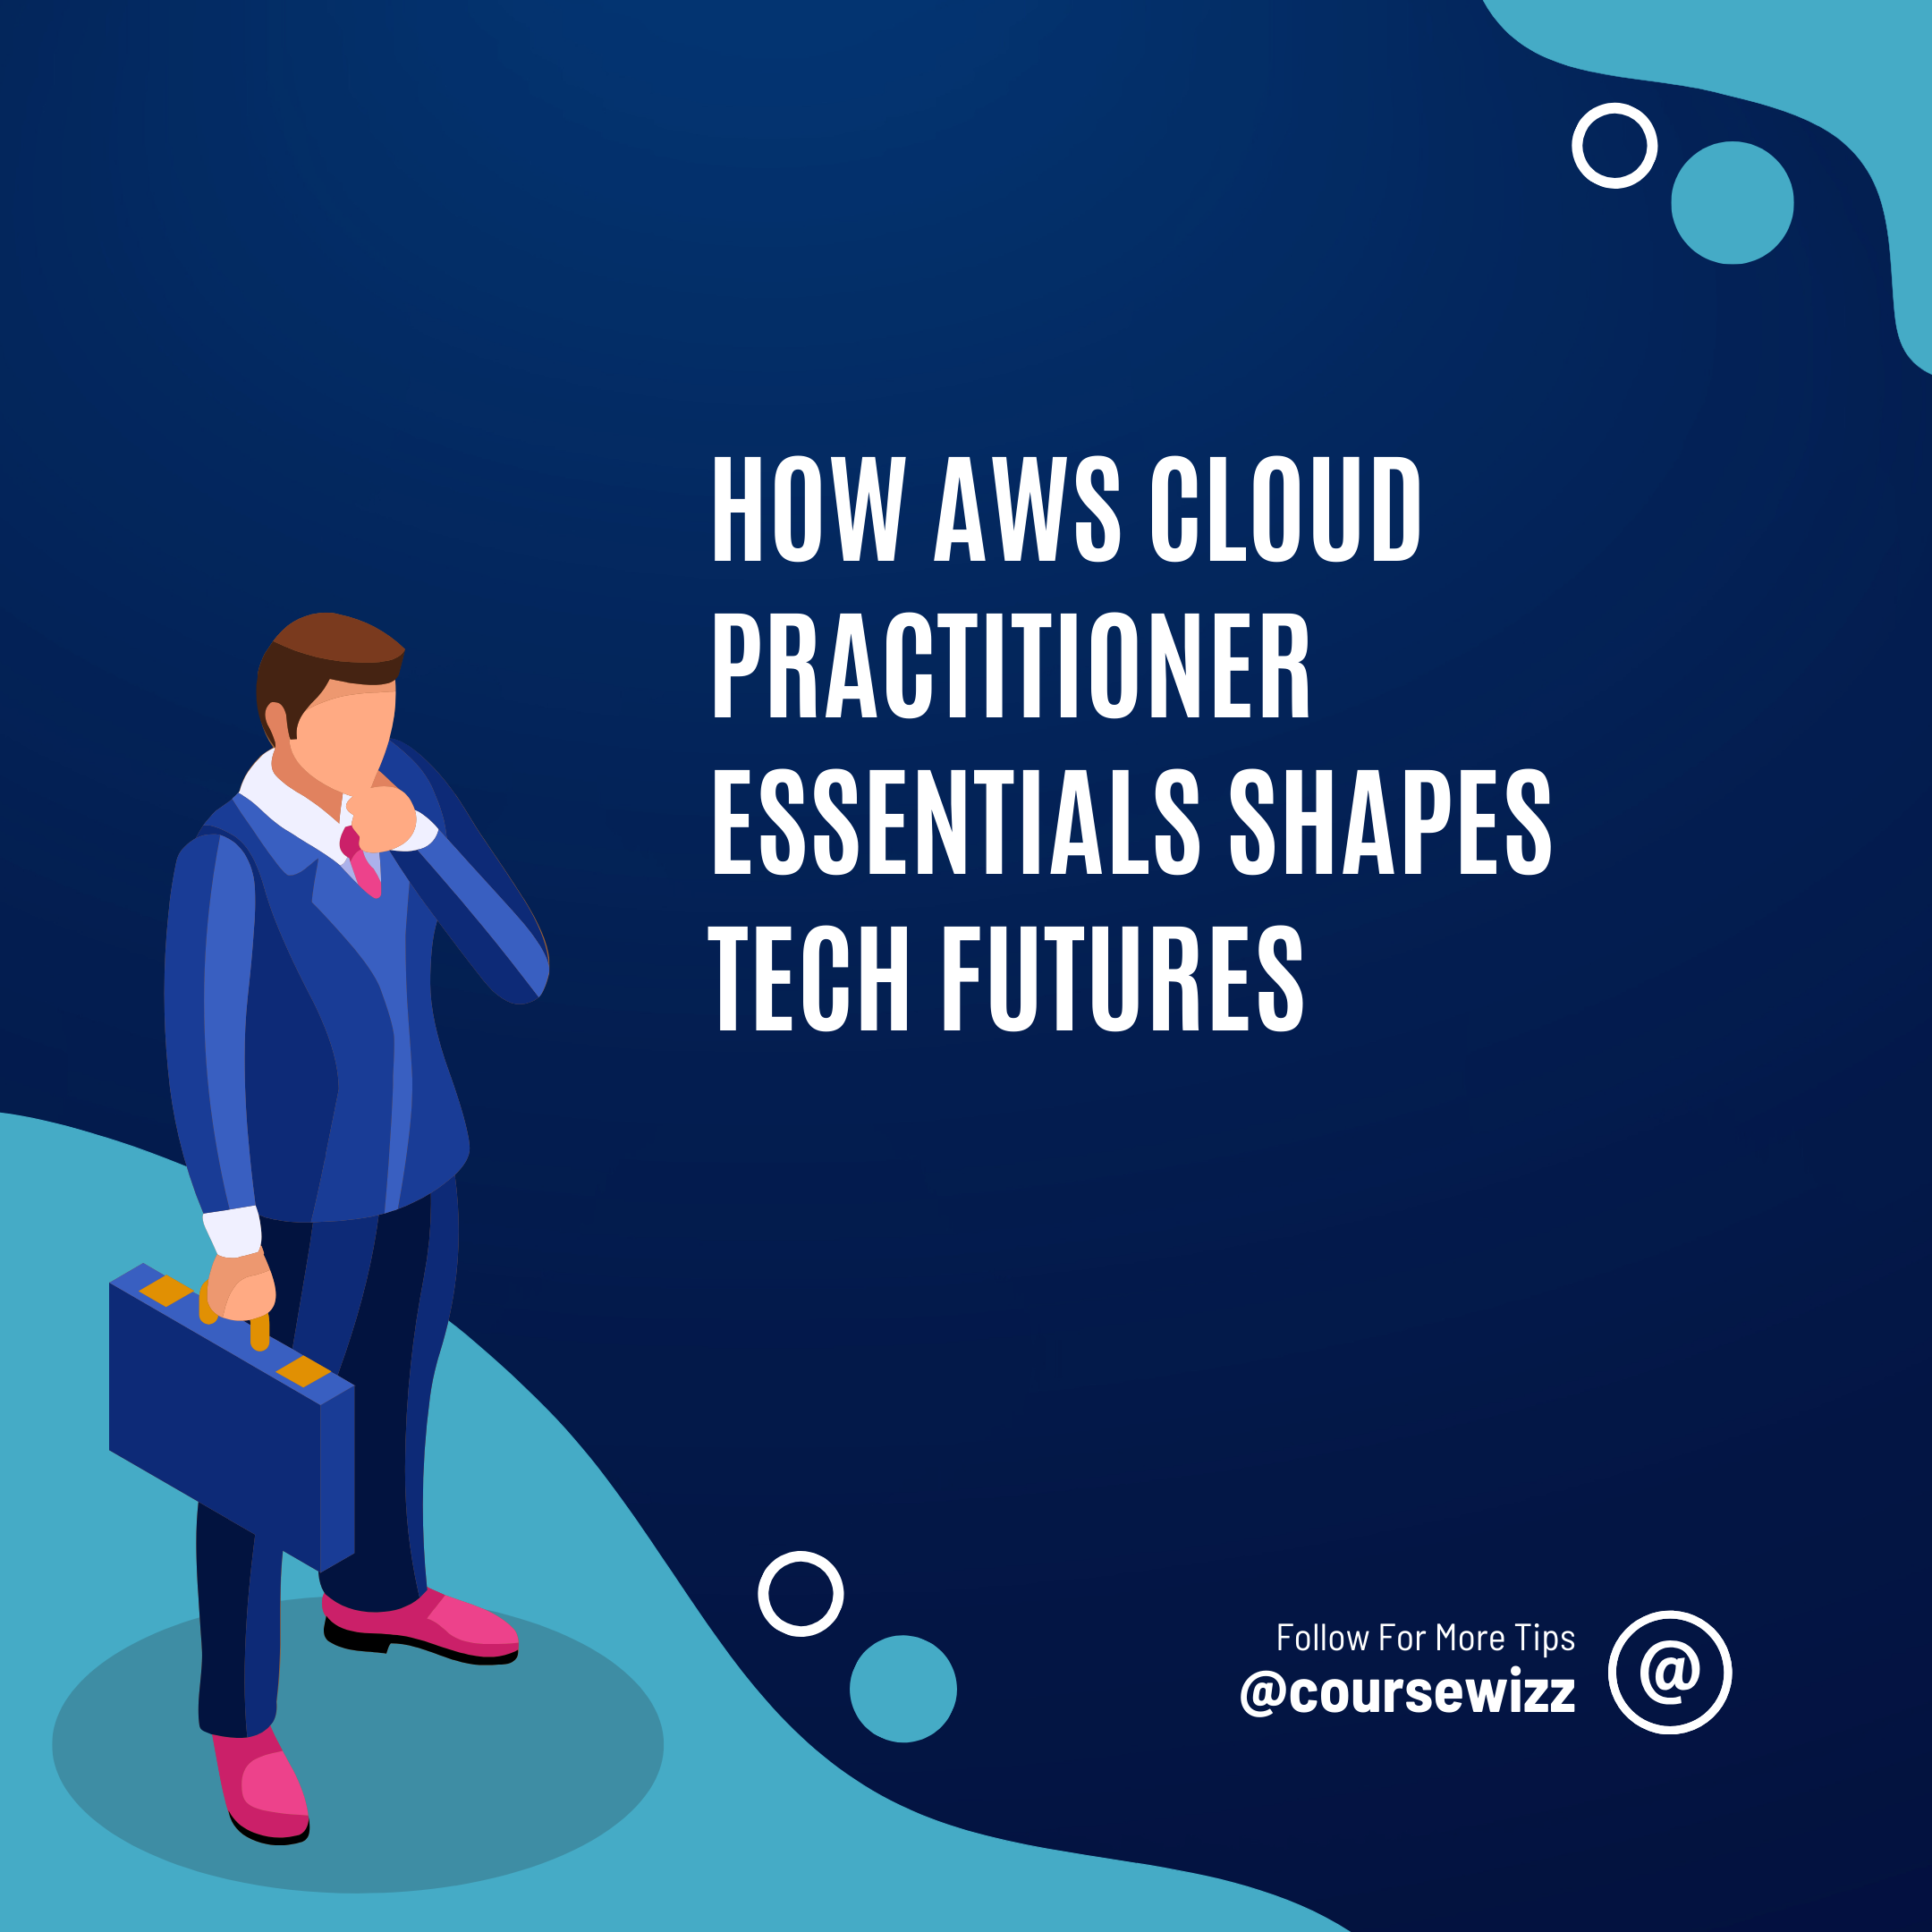 How AWS Cloud Practitioner Essentials Shapes Tech Futures